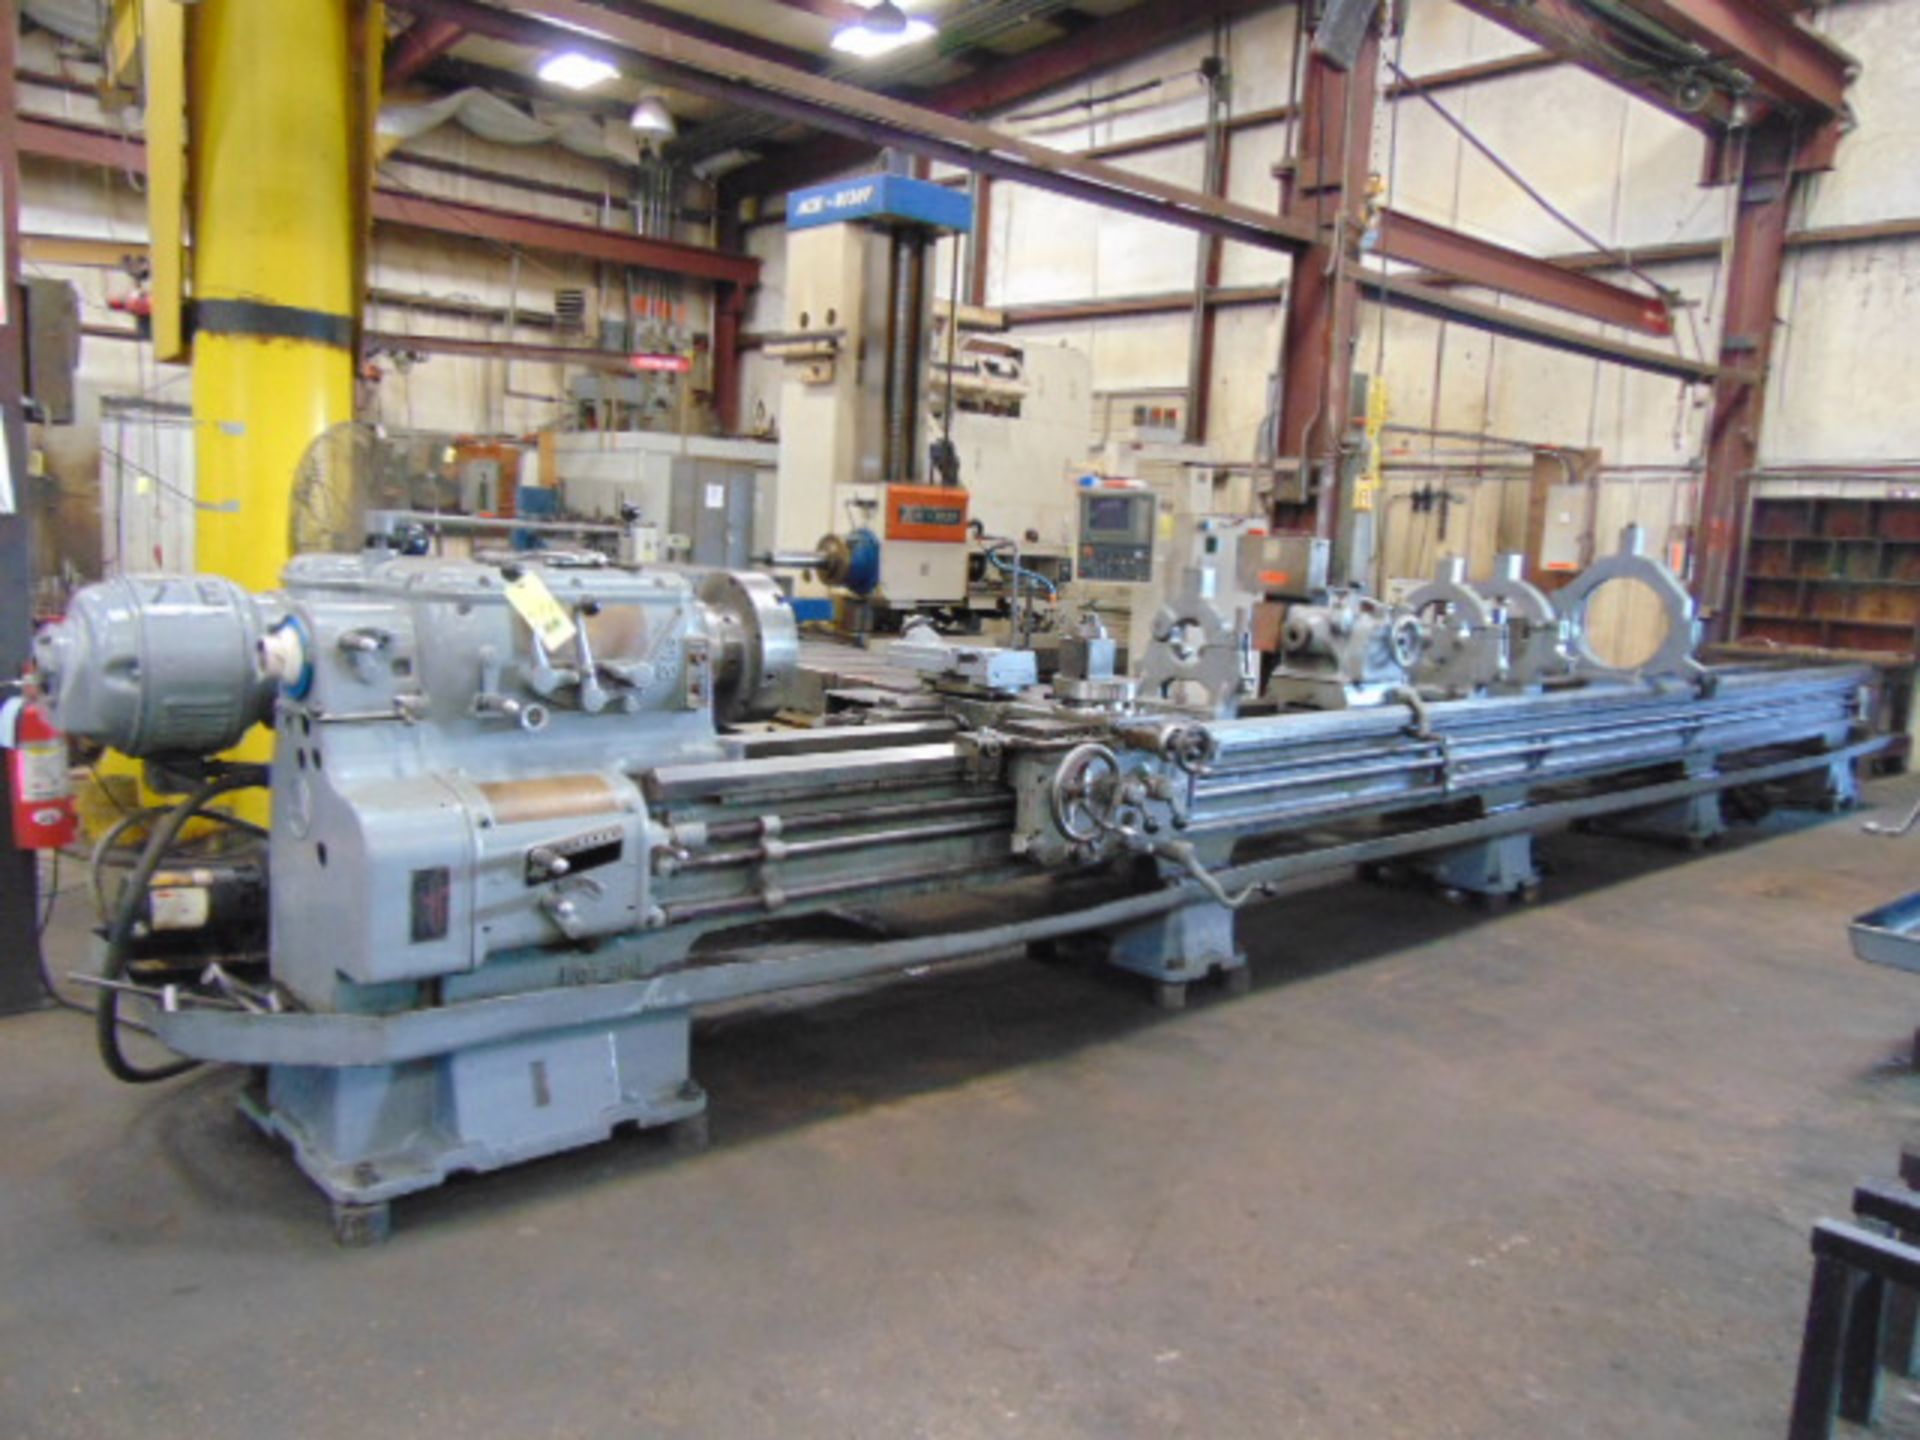 ENGINE LATHE, AXELSON 20” X 307”, 23-5/8” max. swing, spdl. spds: 9.5-961 RPM, taper attach., (5)